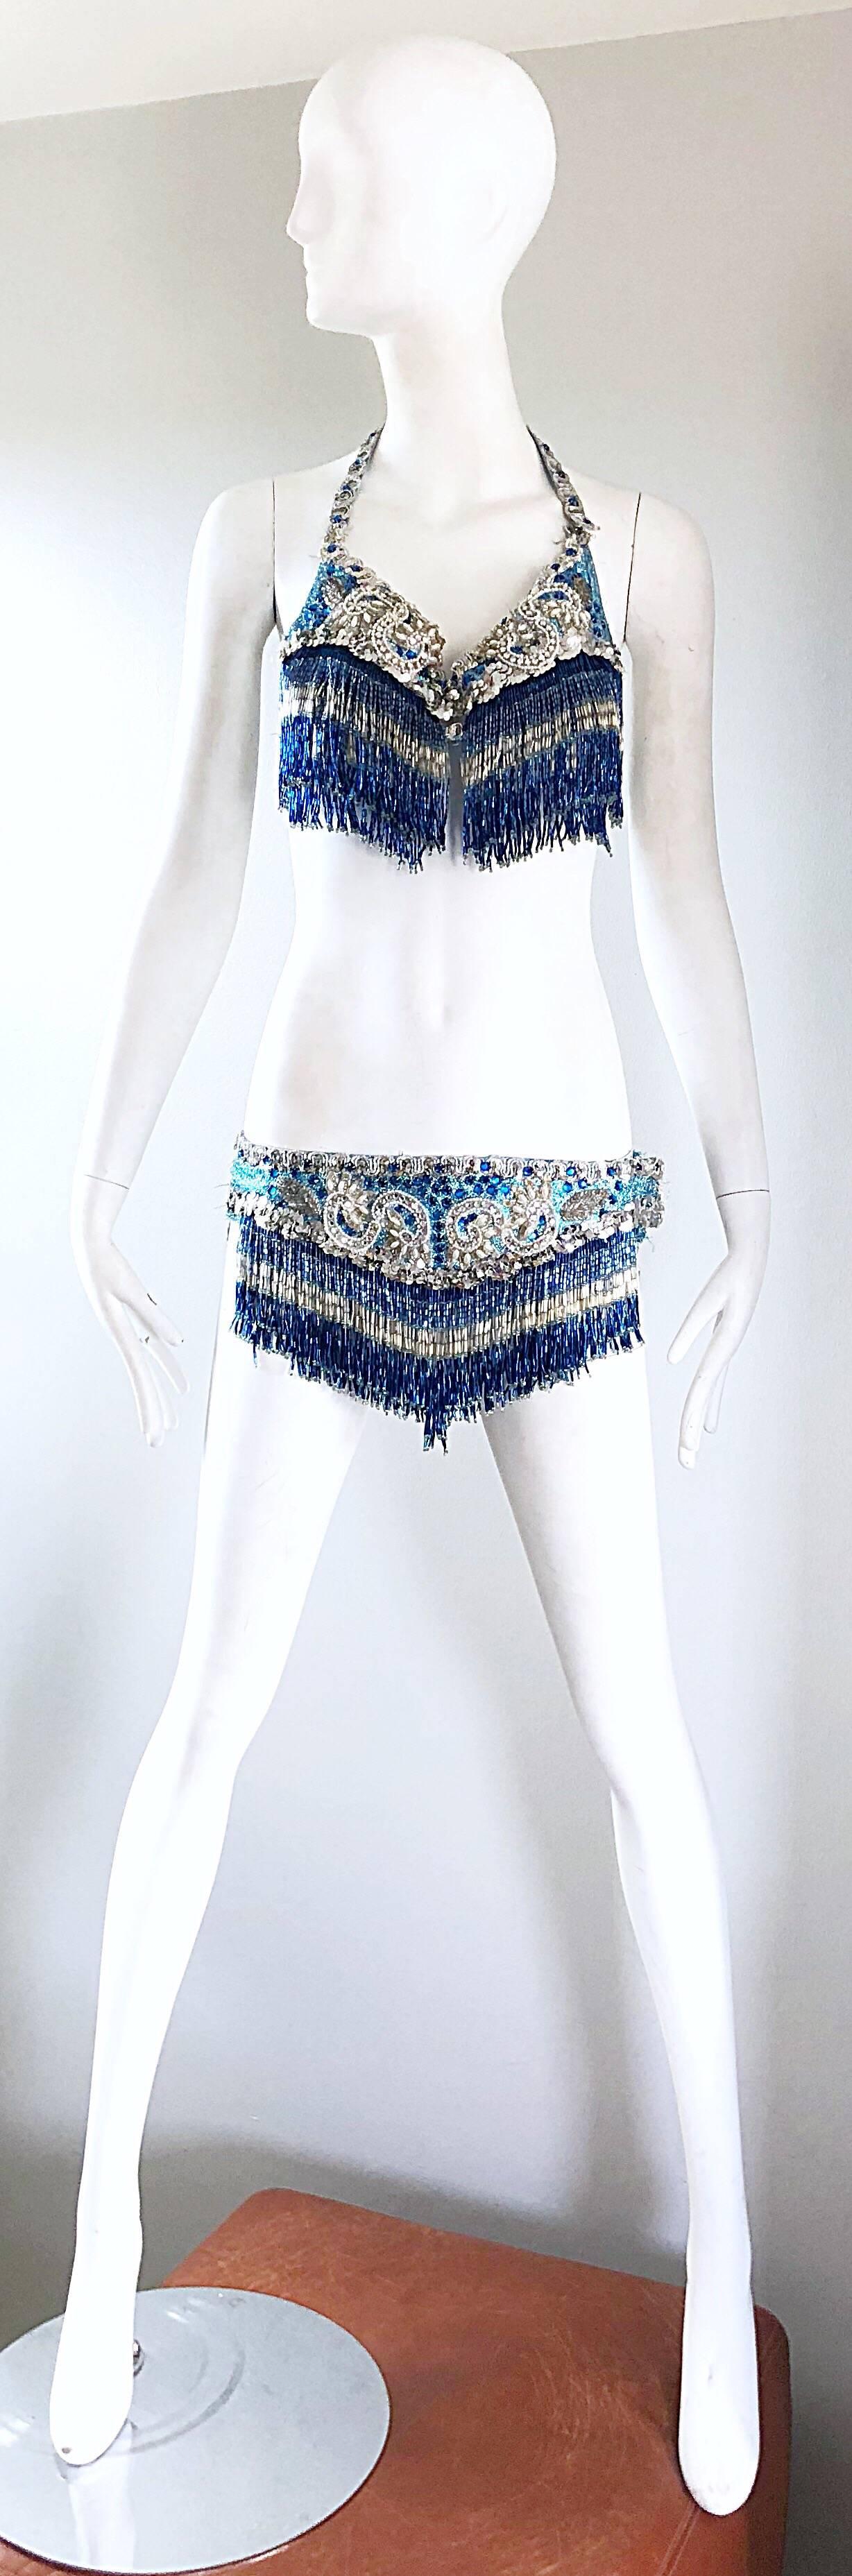 Amazing early 70s beaded, sequined and rhinestone blue and silver lurex showgirl ensemble! Features thousands of hand-sewn beads with fringe on both the bottoms and the top. Halter bra features a hidden clasp at top left shoulder and at left side of